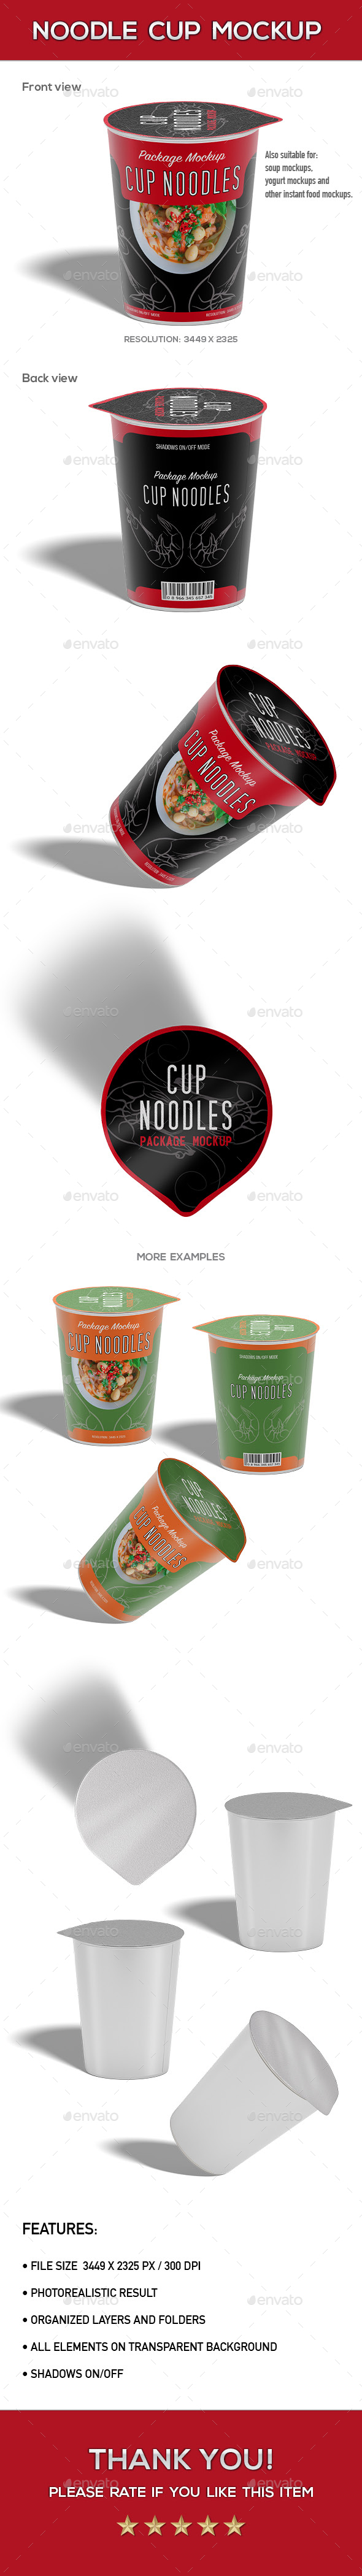 Download Noodle Cup Package Mock-Up by wuka | GraphicRiver